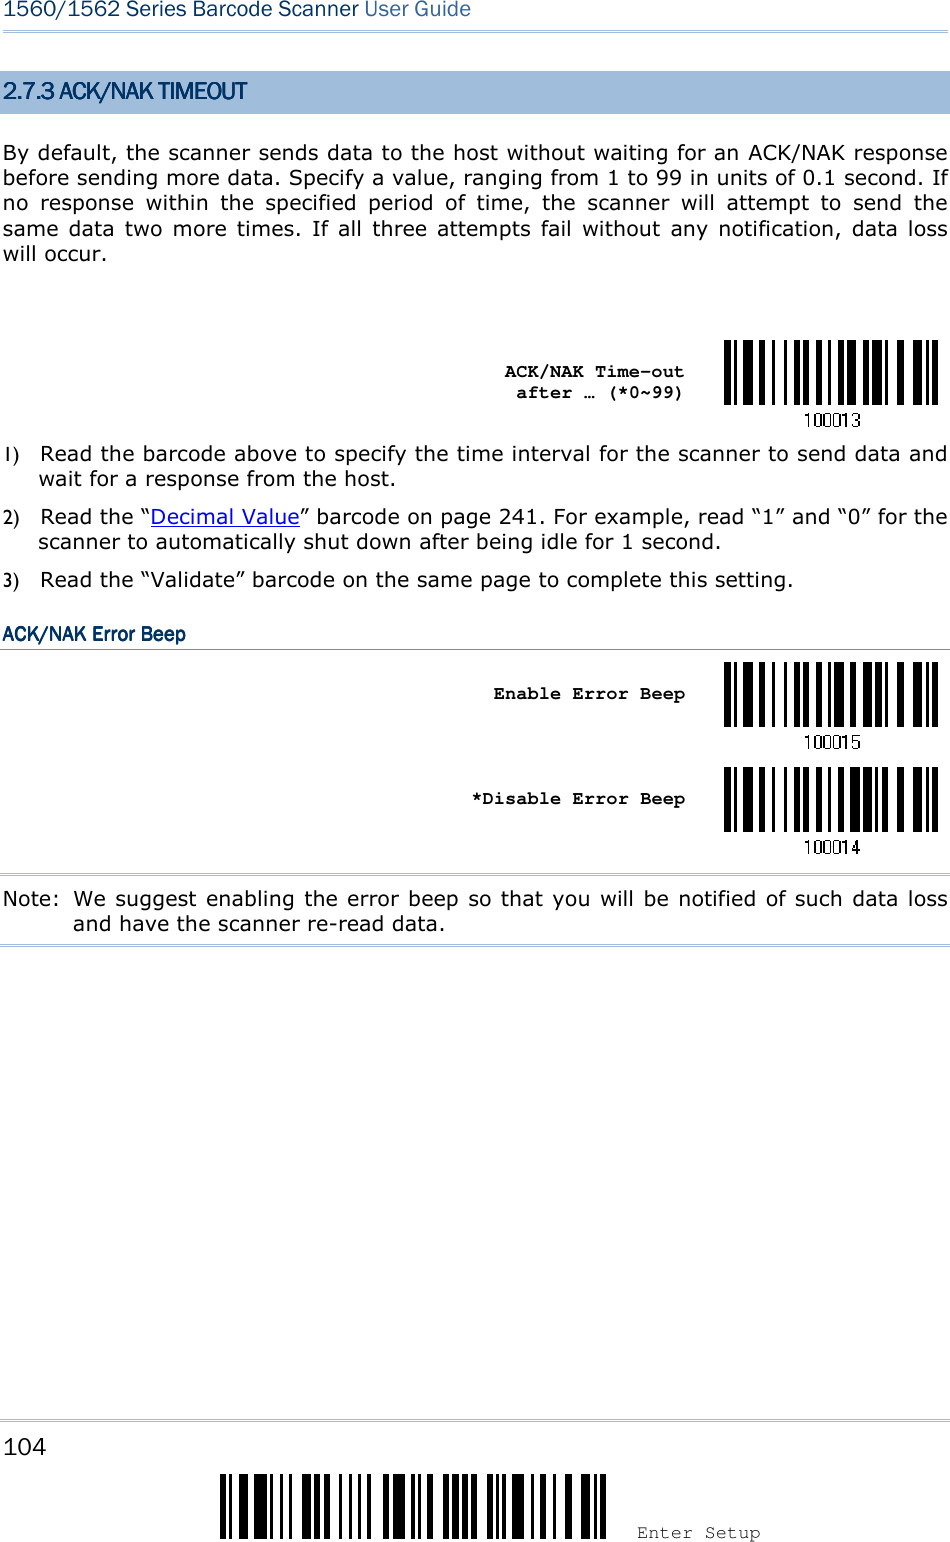 104 Enter Setup 1560/1562 Series Barcode Scanner User Guide  2.2.2.2.7777.3 ACK/NAK TIMEOUT.3 ACK/NAK TIMEOUT.3 ACK/NAK TIMEOUT.3 ACK/NAK TIMEOUT    By default, the scanner sends data to the host without waiting for an ACK/NAK response before sending more data. Specify a value, ranging from 1 to 99 in units of 0.1 second. If no  response  within  the  specified  period  of  time,  the  scanner  will  attempt  to  send  the same  data  two  more  times.  If  all  three attempts  fail  without  any  notification,  data loss will occur.     ACK/NAK Time-out after … (*0~99)  1) Read the barcode above to specify the time interval for the scanner to send data and wait for a response from the host. 2) Read the “Decimal Value” barcode on page 241. For example, read “1” and “0” for the scanner to automatically shut down after being idle for 1 second.   3) Read the “Validate” barcode on the same page to complete this setting. ACK/NAK Error BeepACK/NAK Error BeepACK/NAK Error BeepACK/NAK Error Beep       Enable Error Beep     *Disable Error Beep  Note:  We suggest enabling the error beep so that you will be notified of such data loss and have the scanner re-read data.      